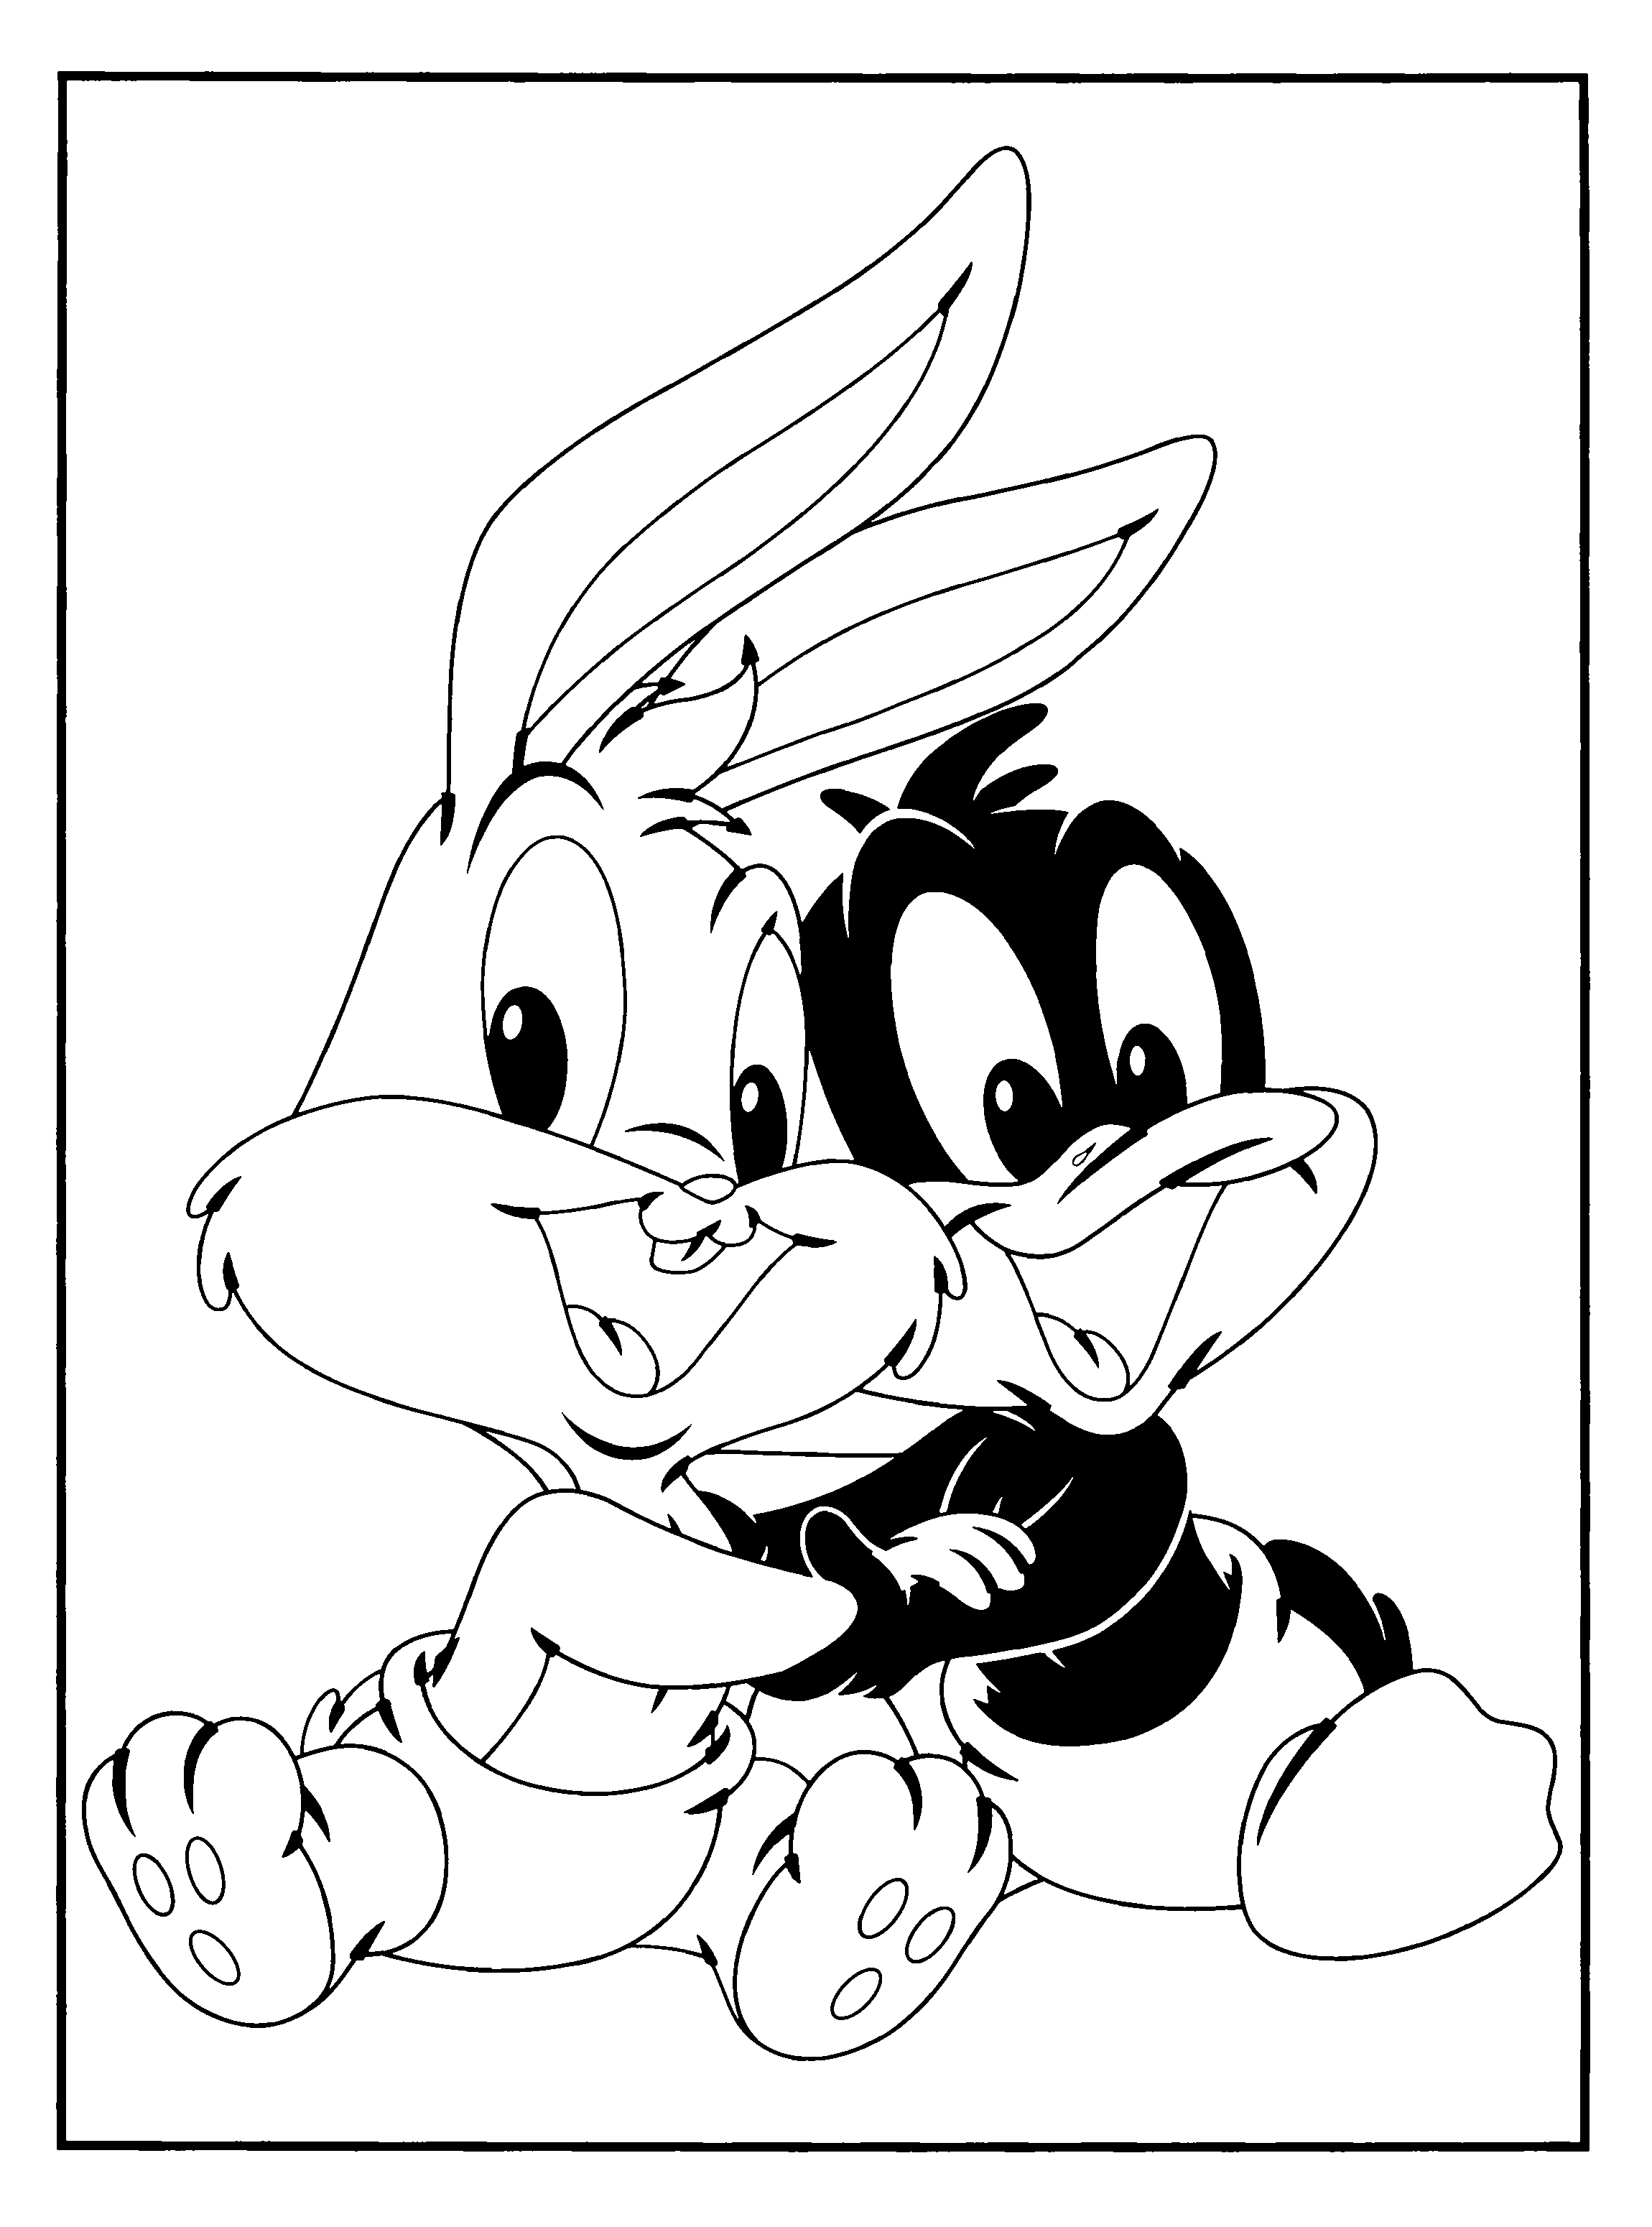 Taz Cartoon Coloring Pages Looney Tunes Taz Coloring Pages